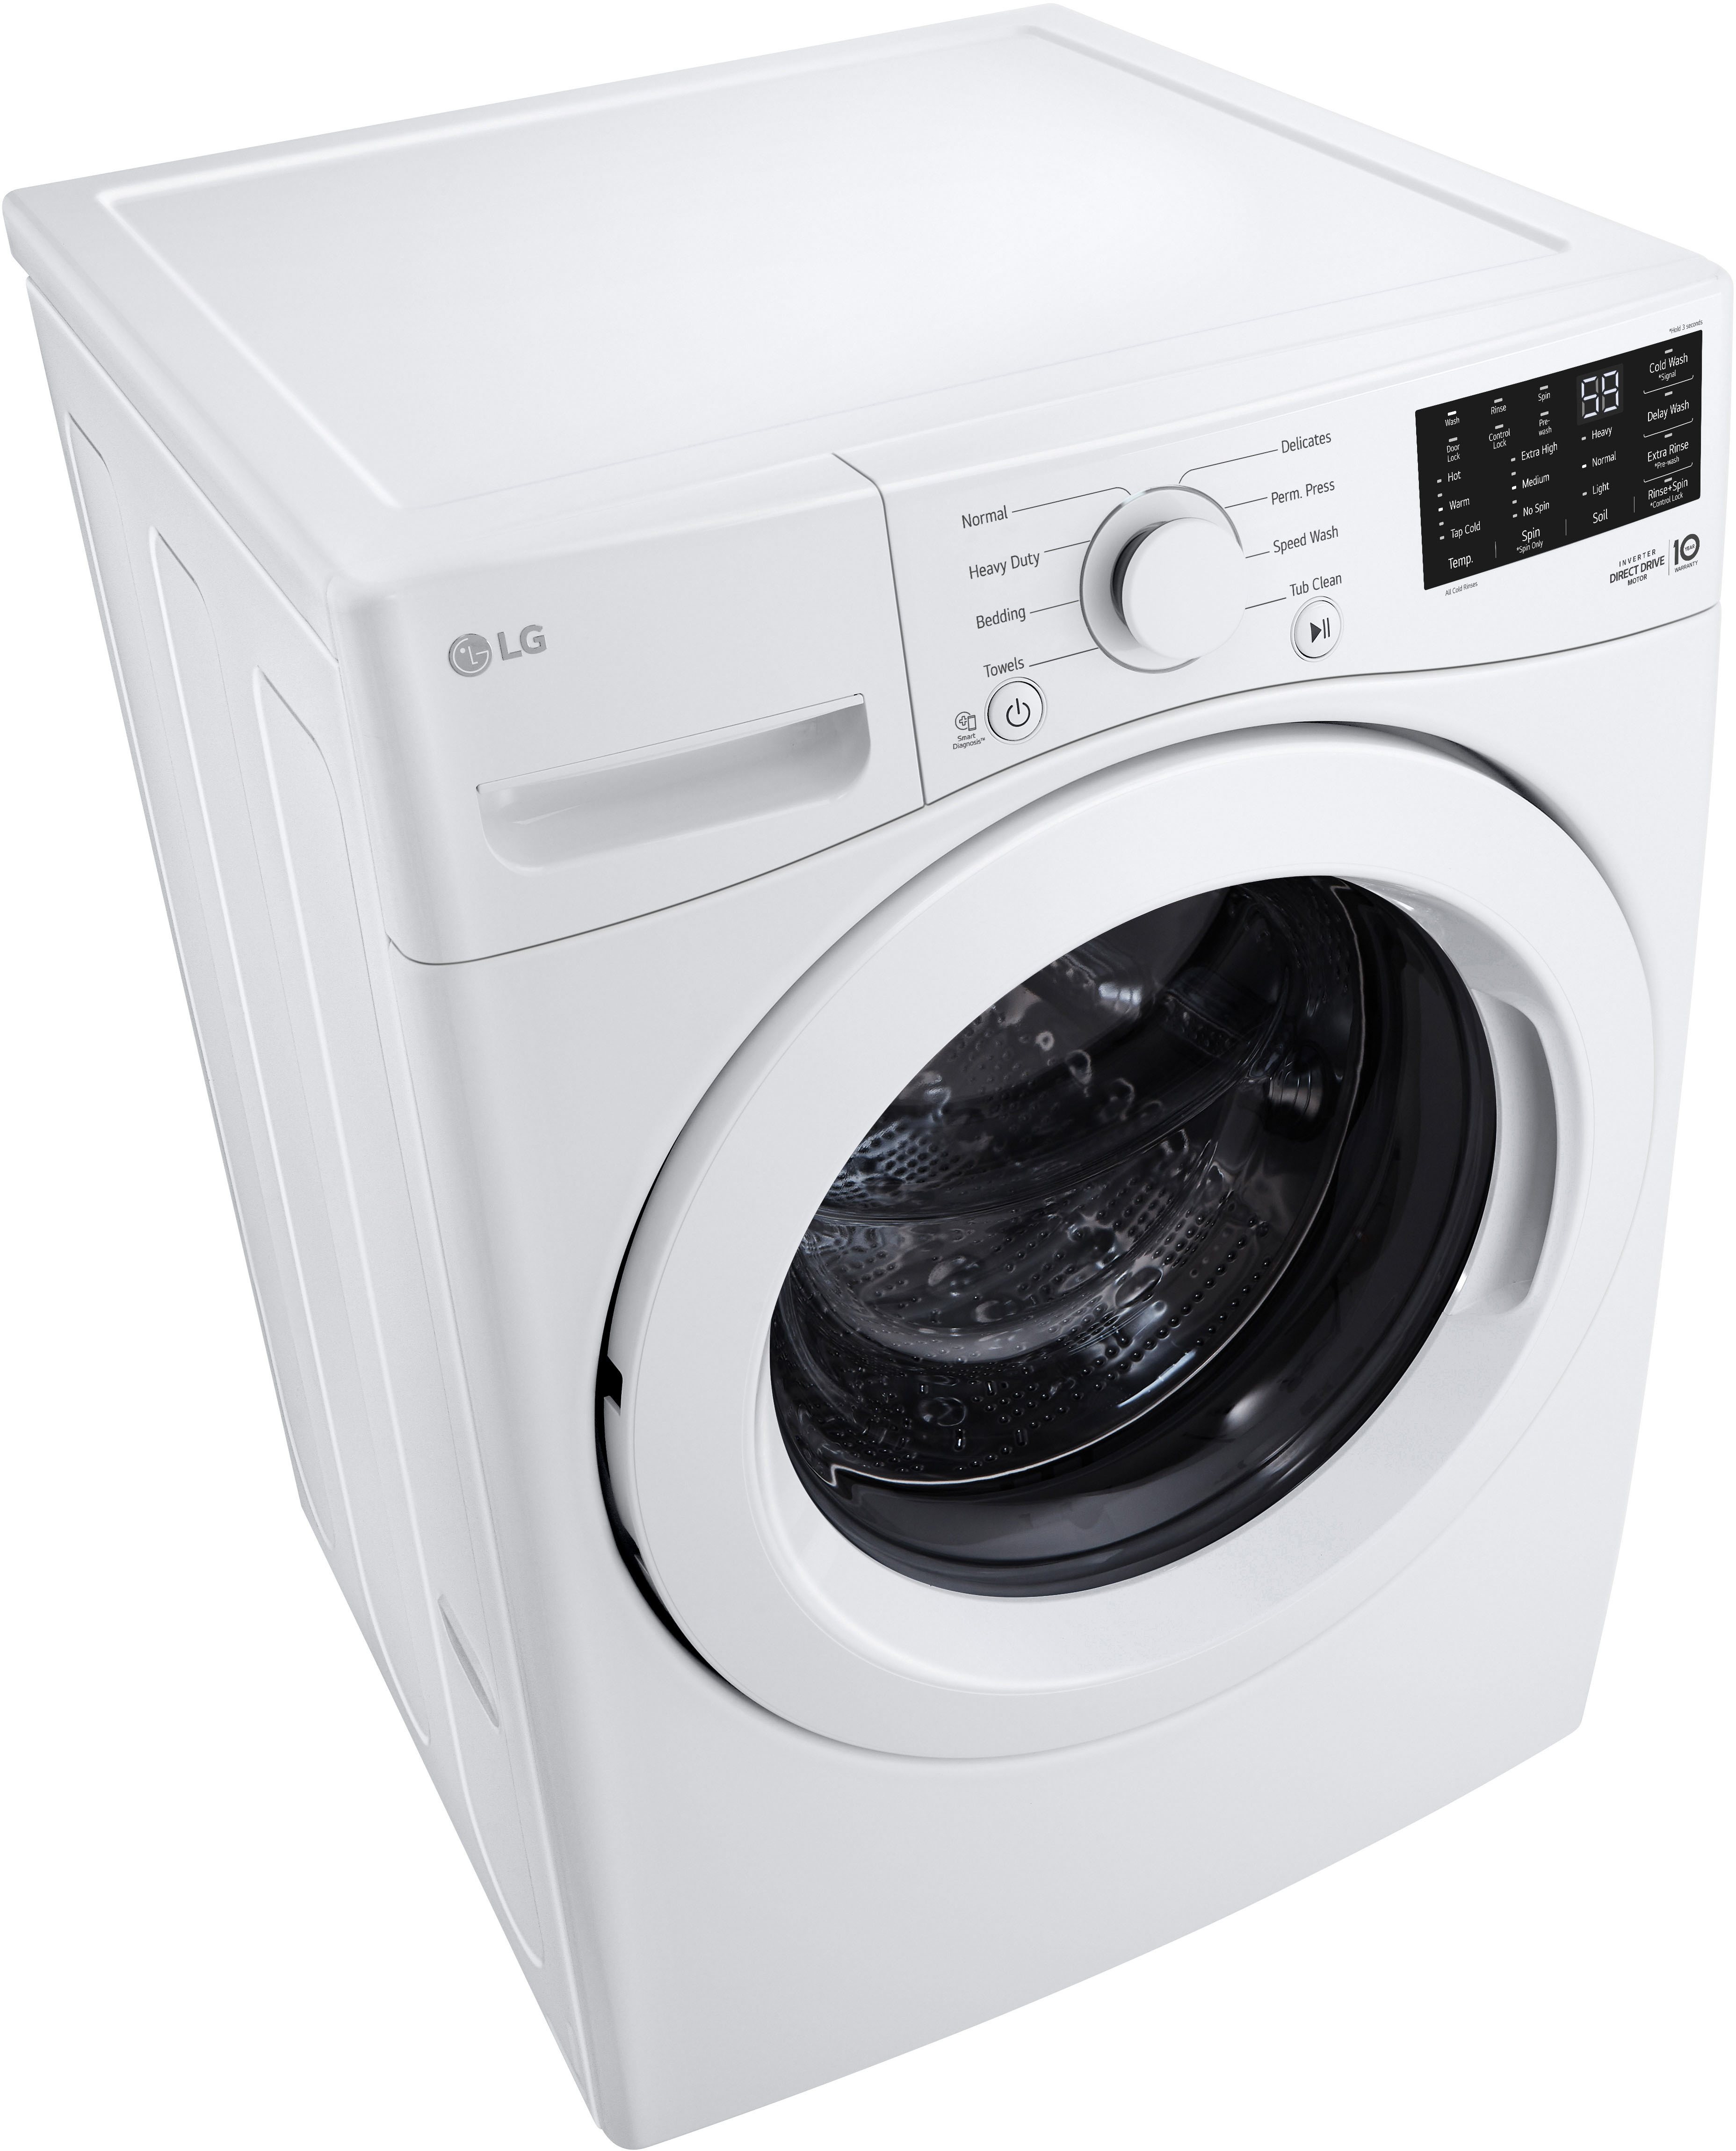 Buy Front Best WM3470CW White Washer with Load 6Motion - Ft. Technology LG Cu. 5.0 High-Efficiency